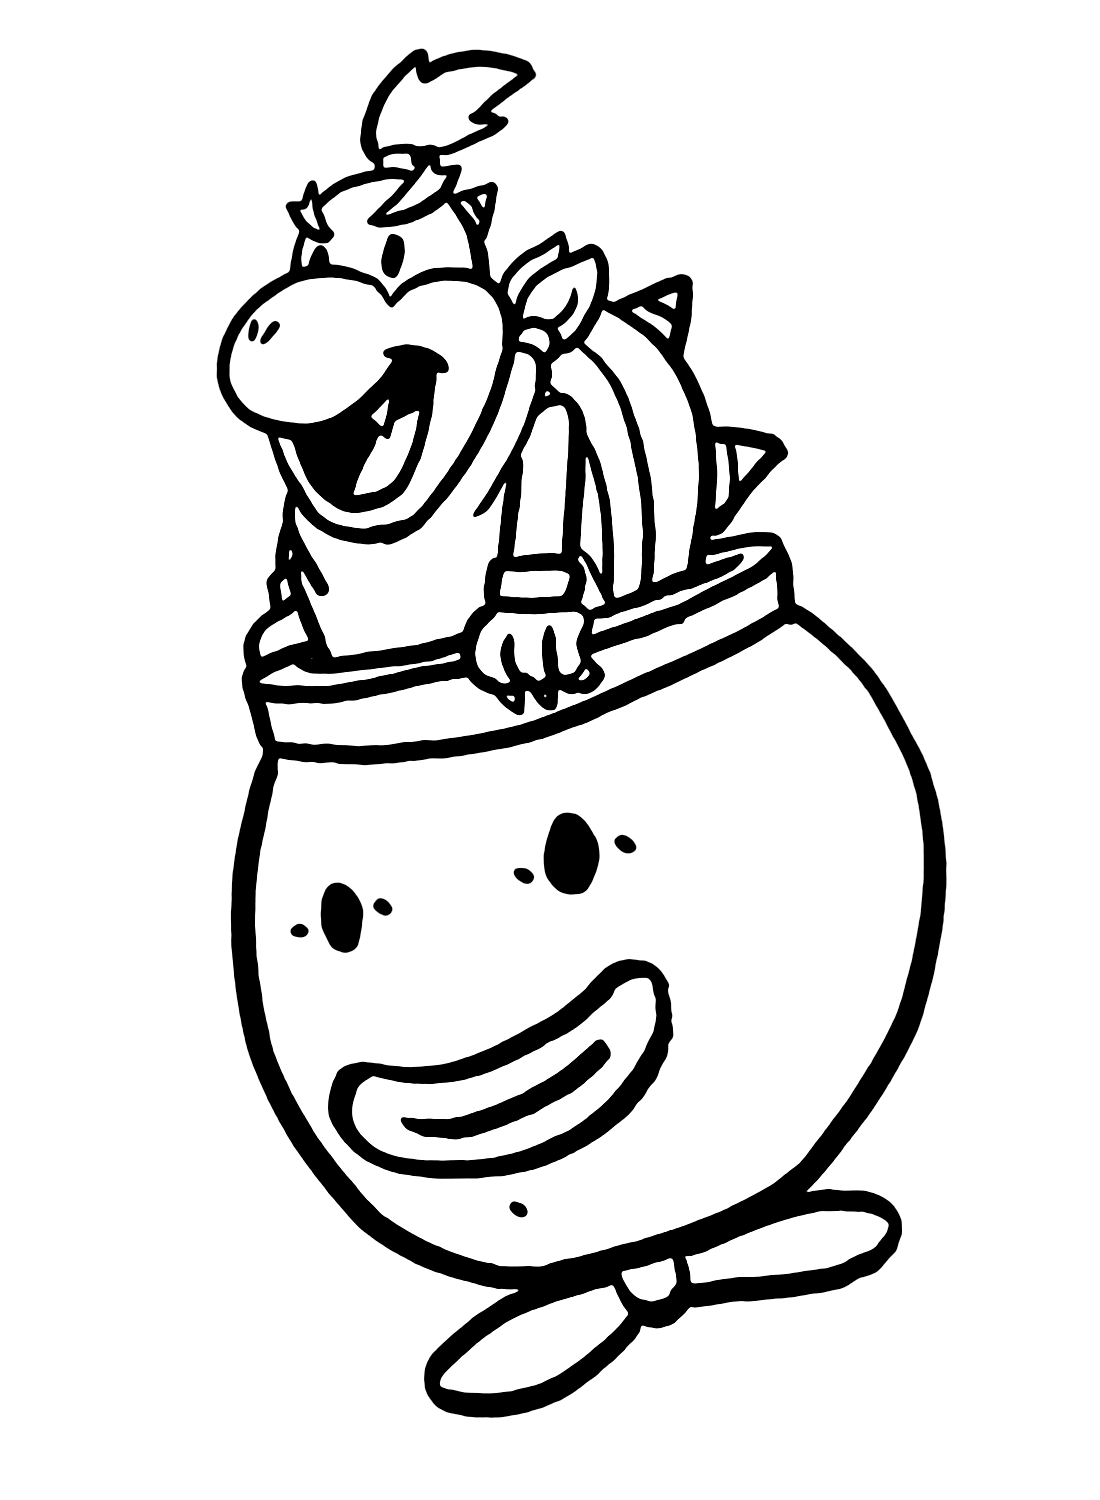 Bowser Jr in Super Mario Coloring Pages